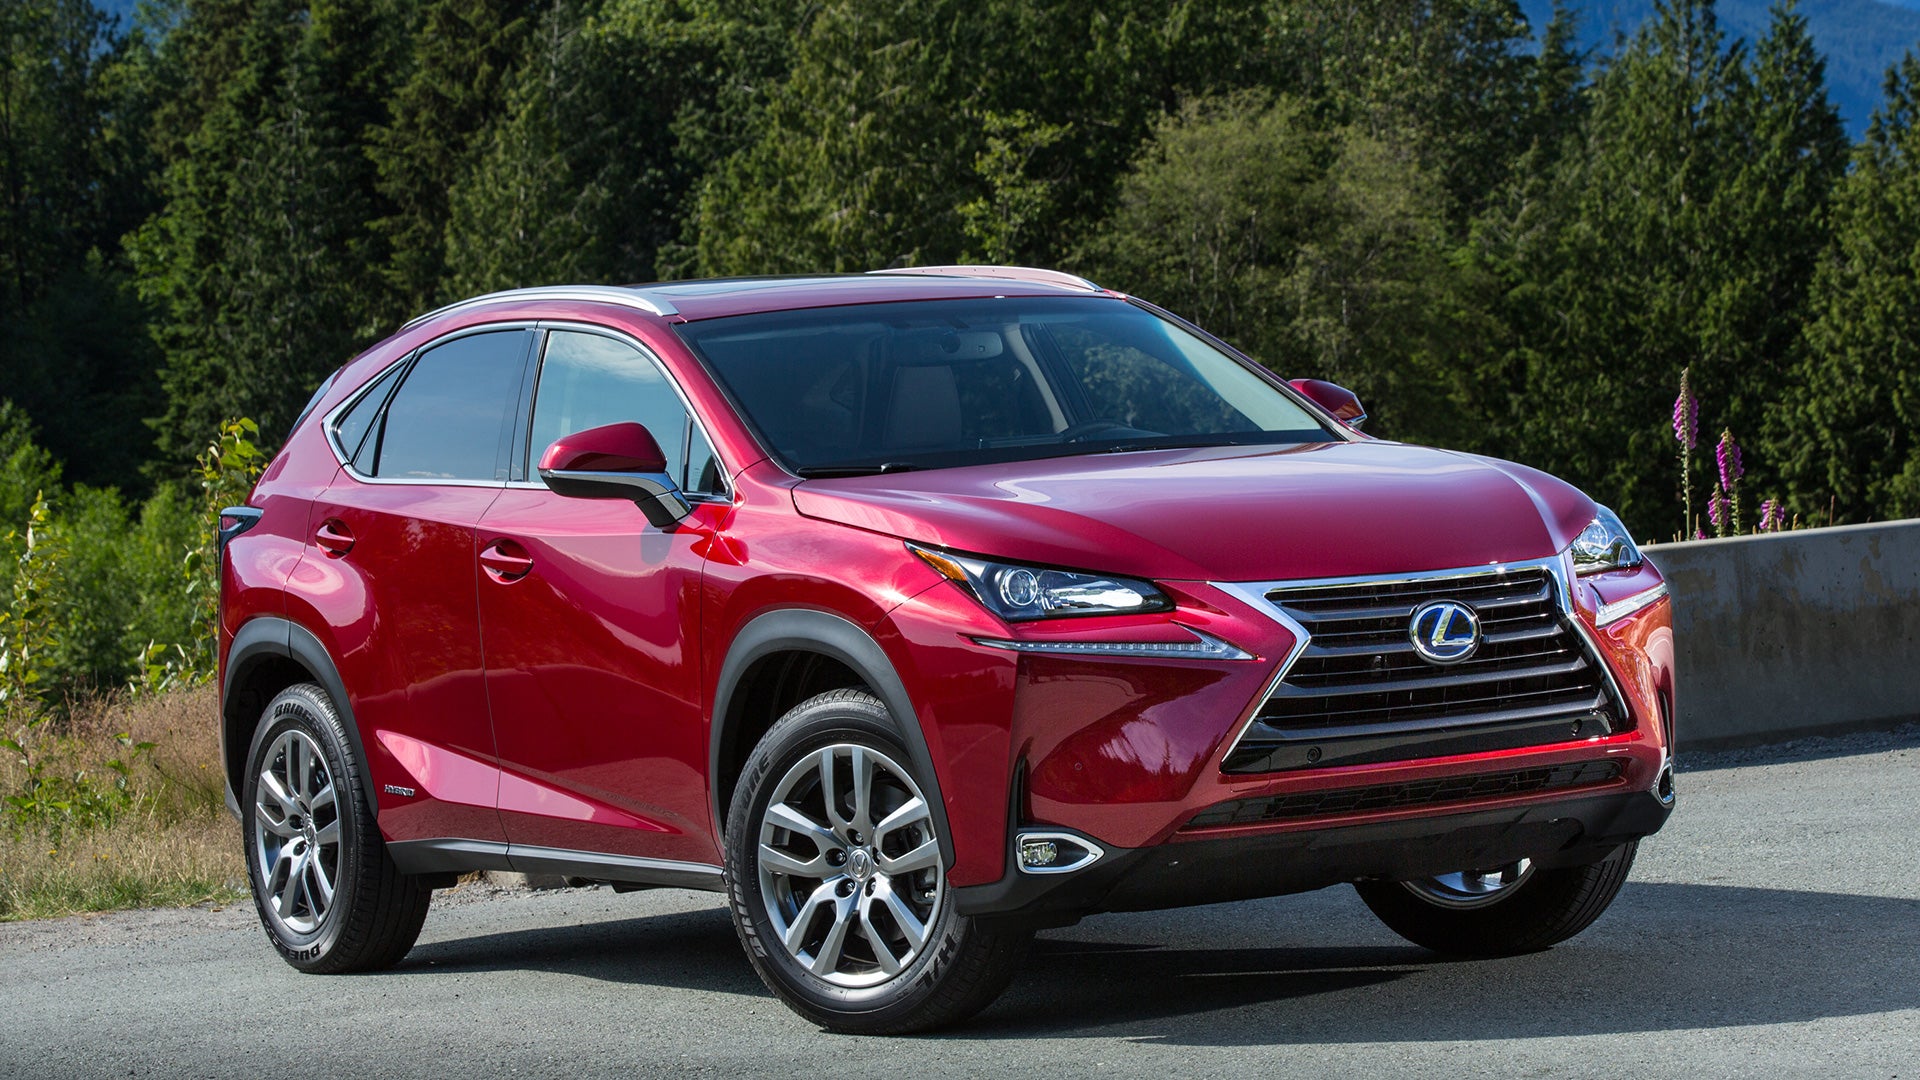 The 2018 Lexus NX300h Hybrid AWD Test Drive Review The